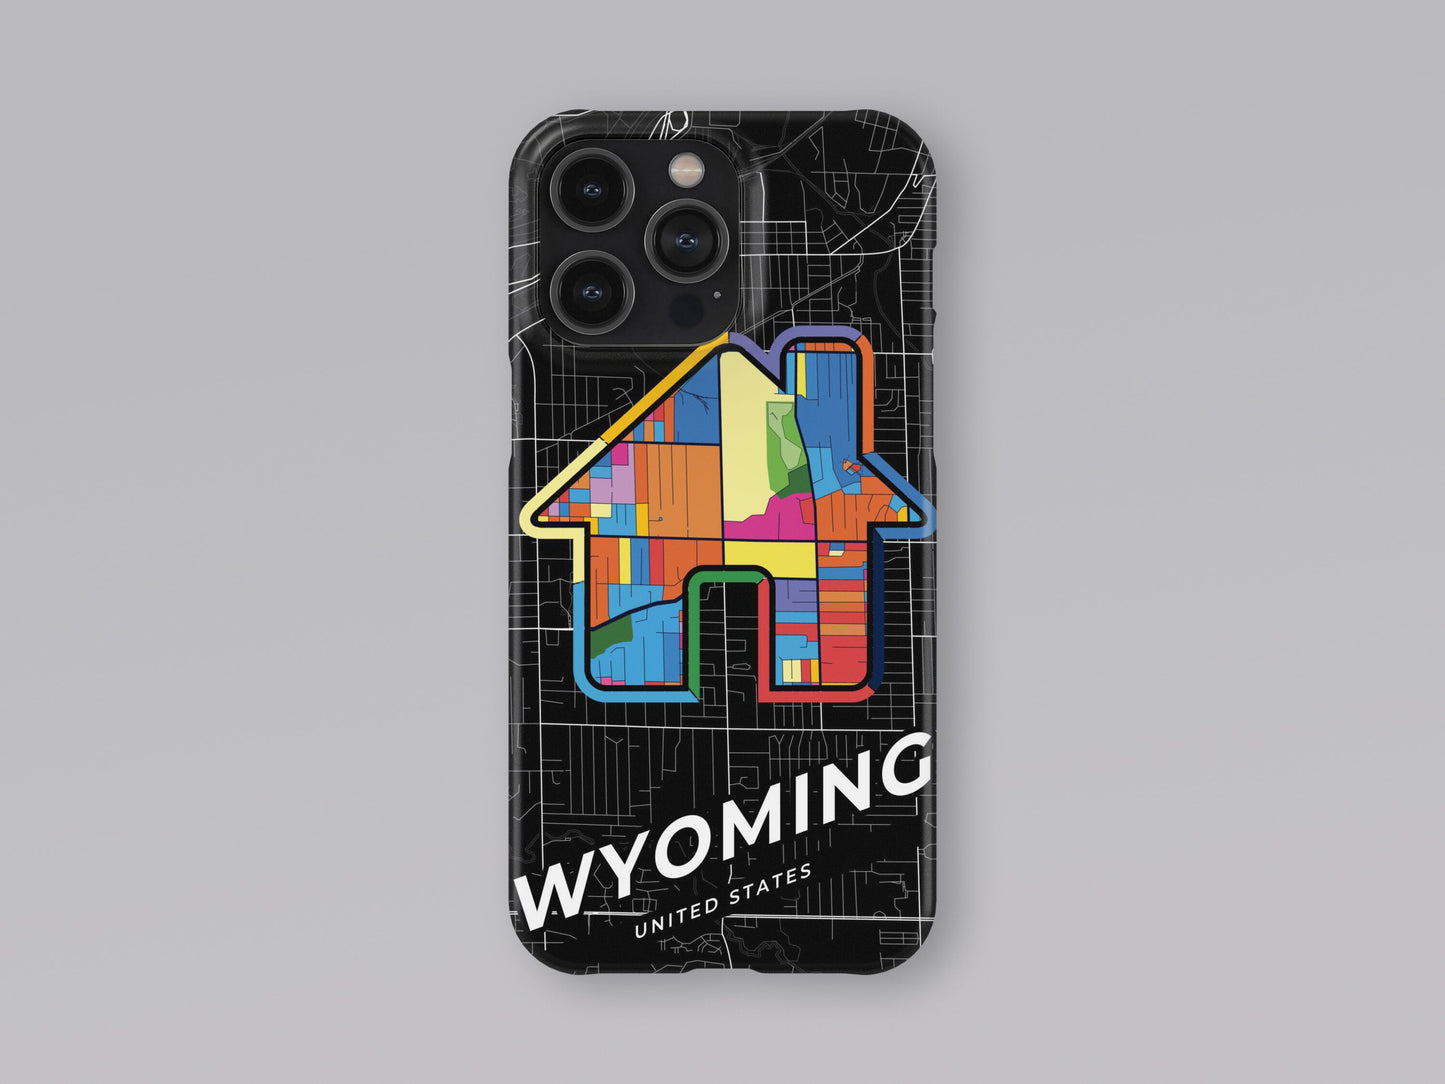 Wyoming Michigan slim phone case with colorful icon 3